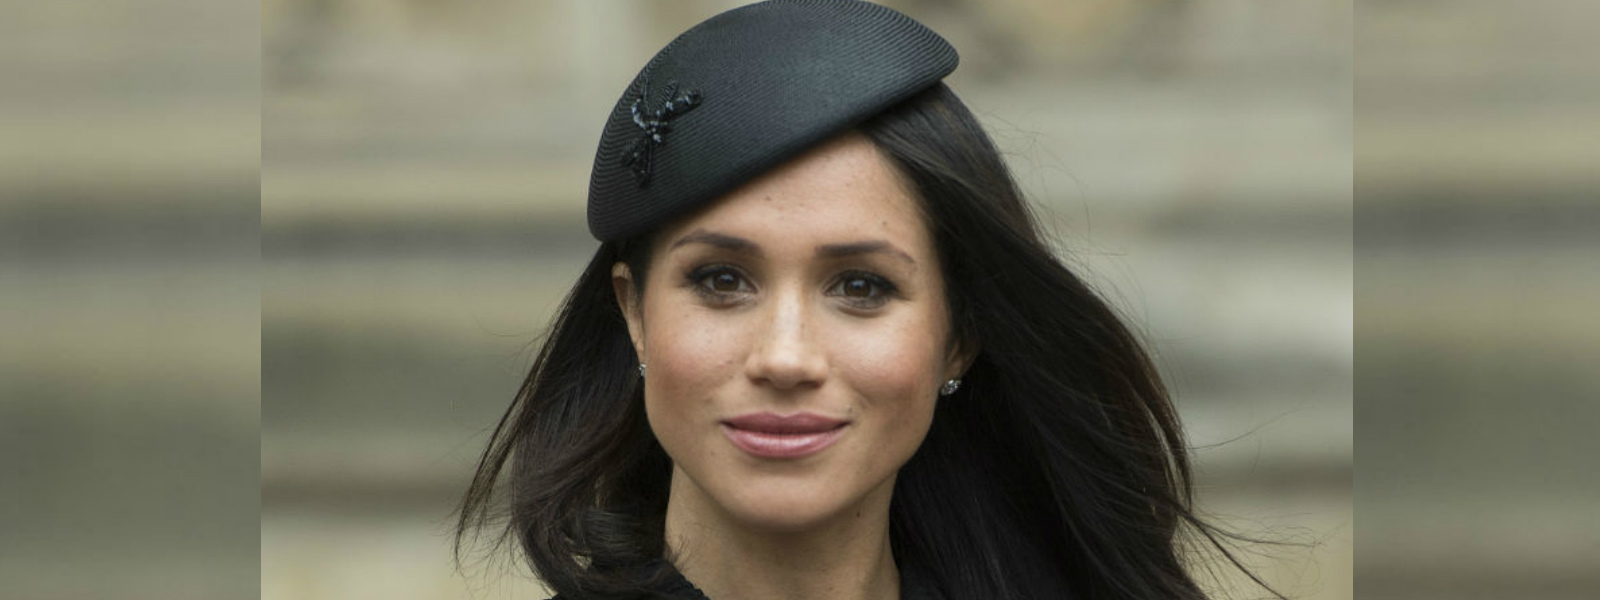 Meghan Markle's final Suits episode aired